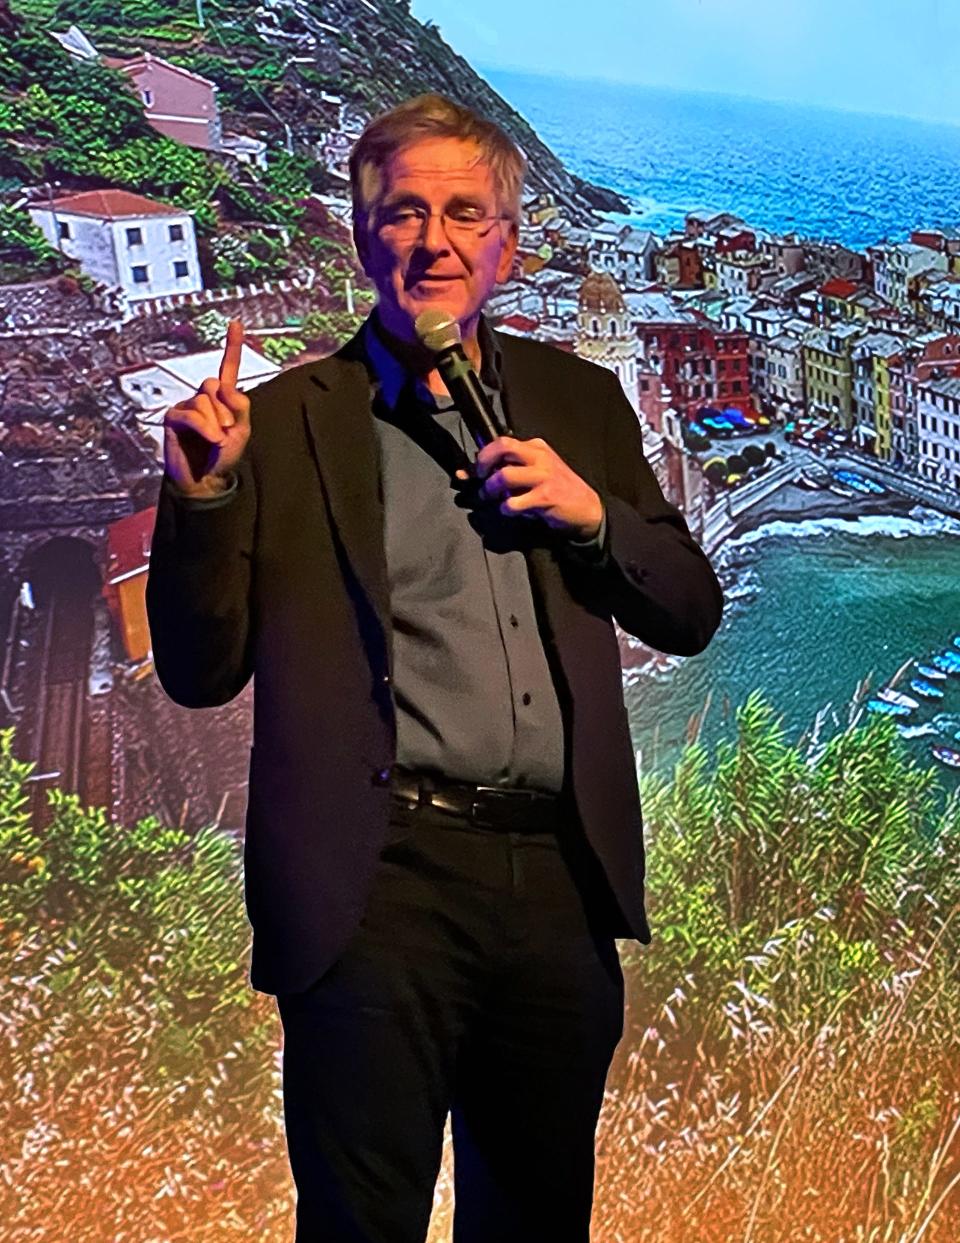 Travel personality Rick Steves describes to an Abilene audience his 40-plus years of bringing to light out-of-the-way places across Europe.